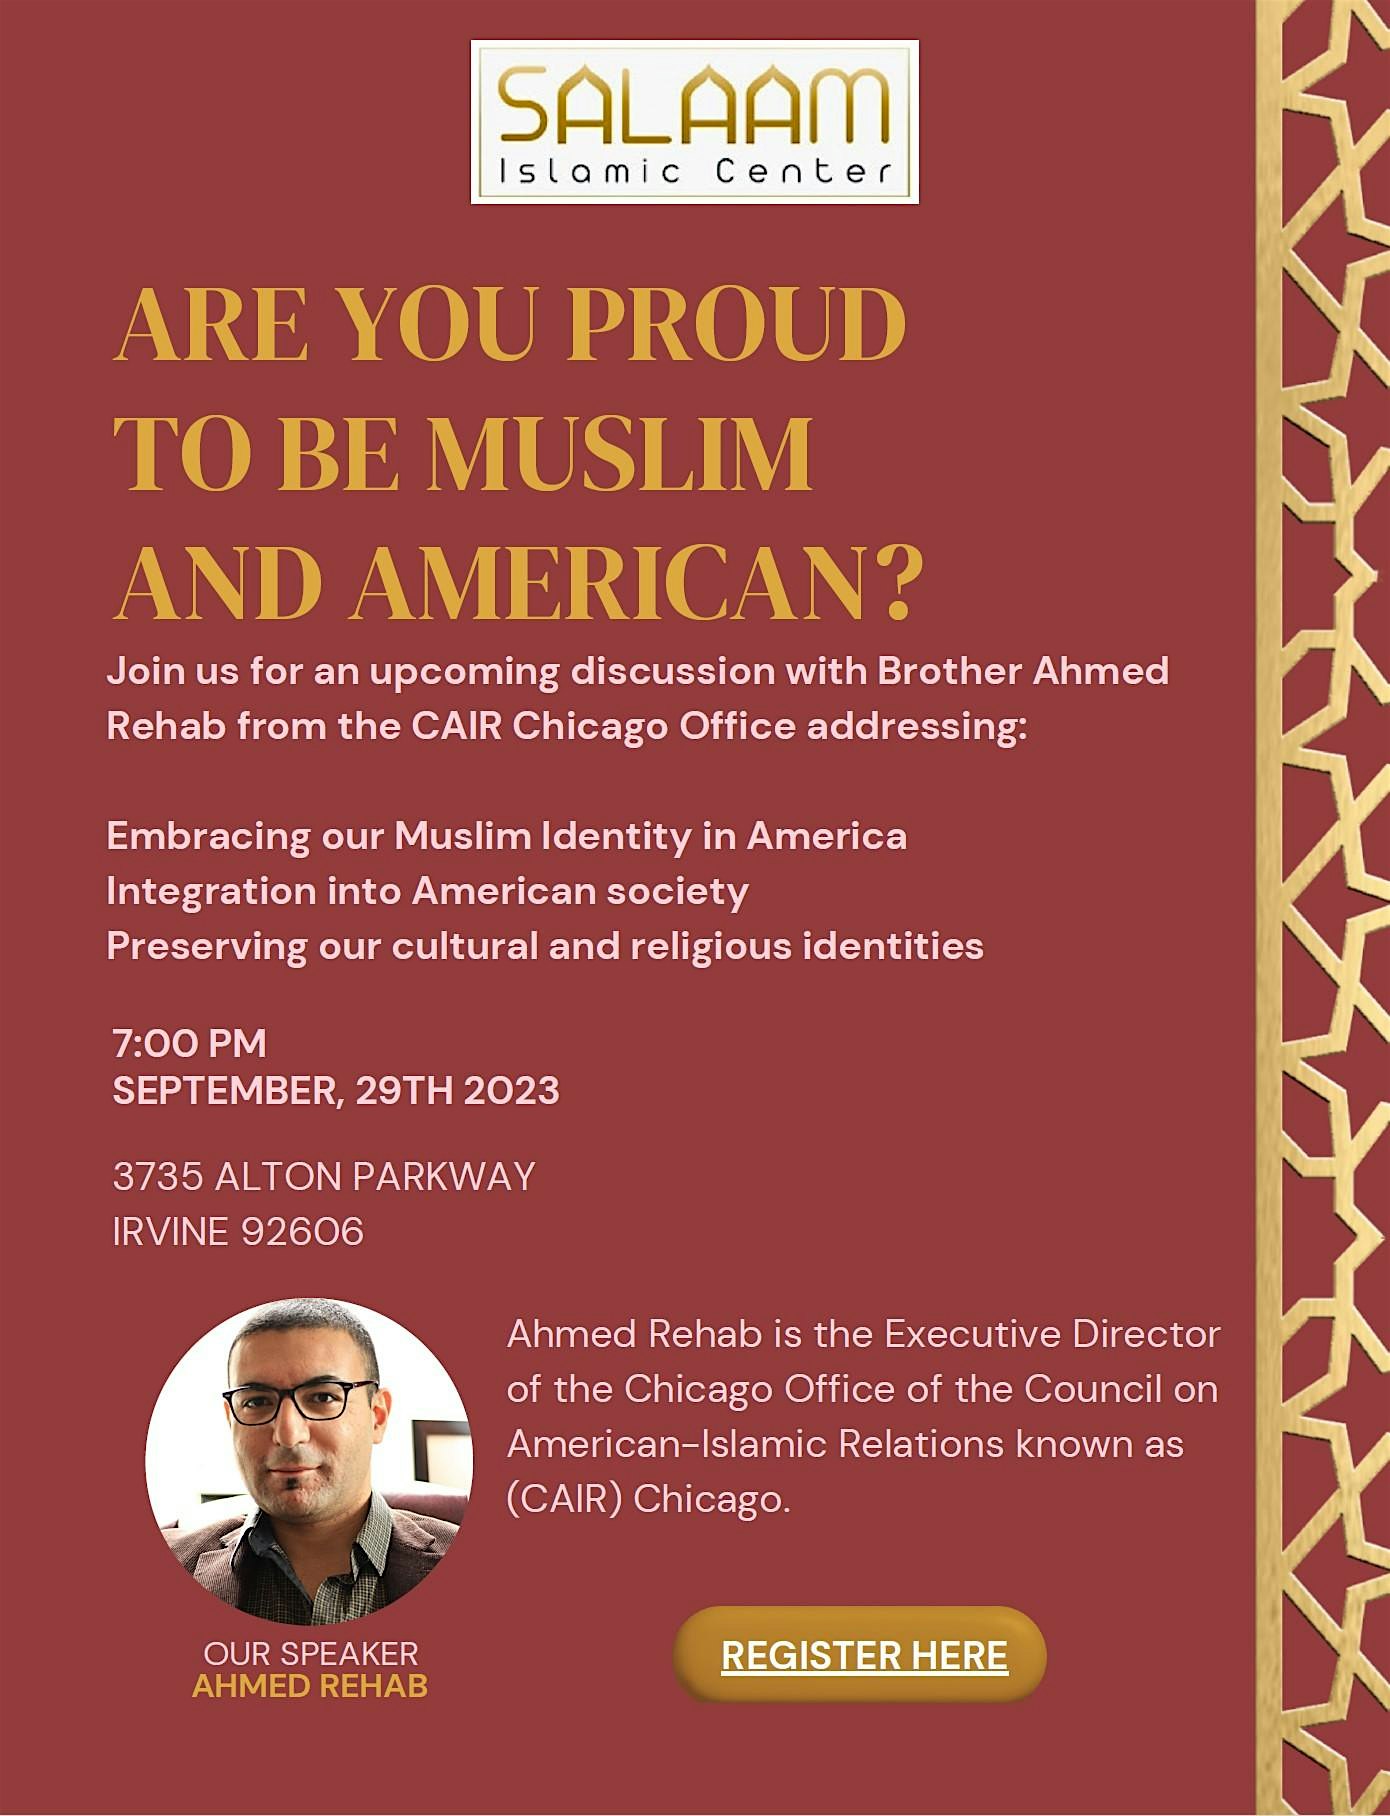 ARE YOU PROUD TO BE MUSLIM AND AMERICAN?